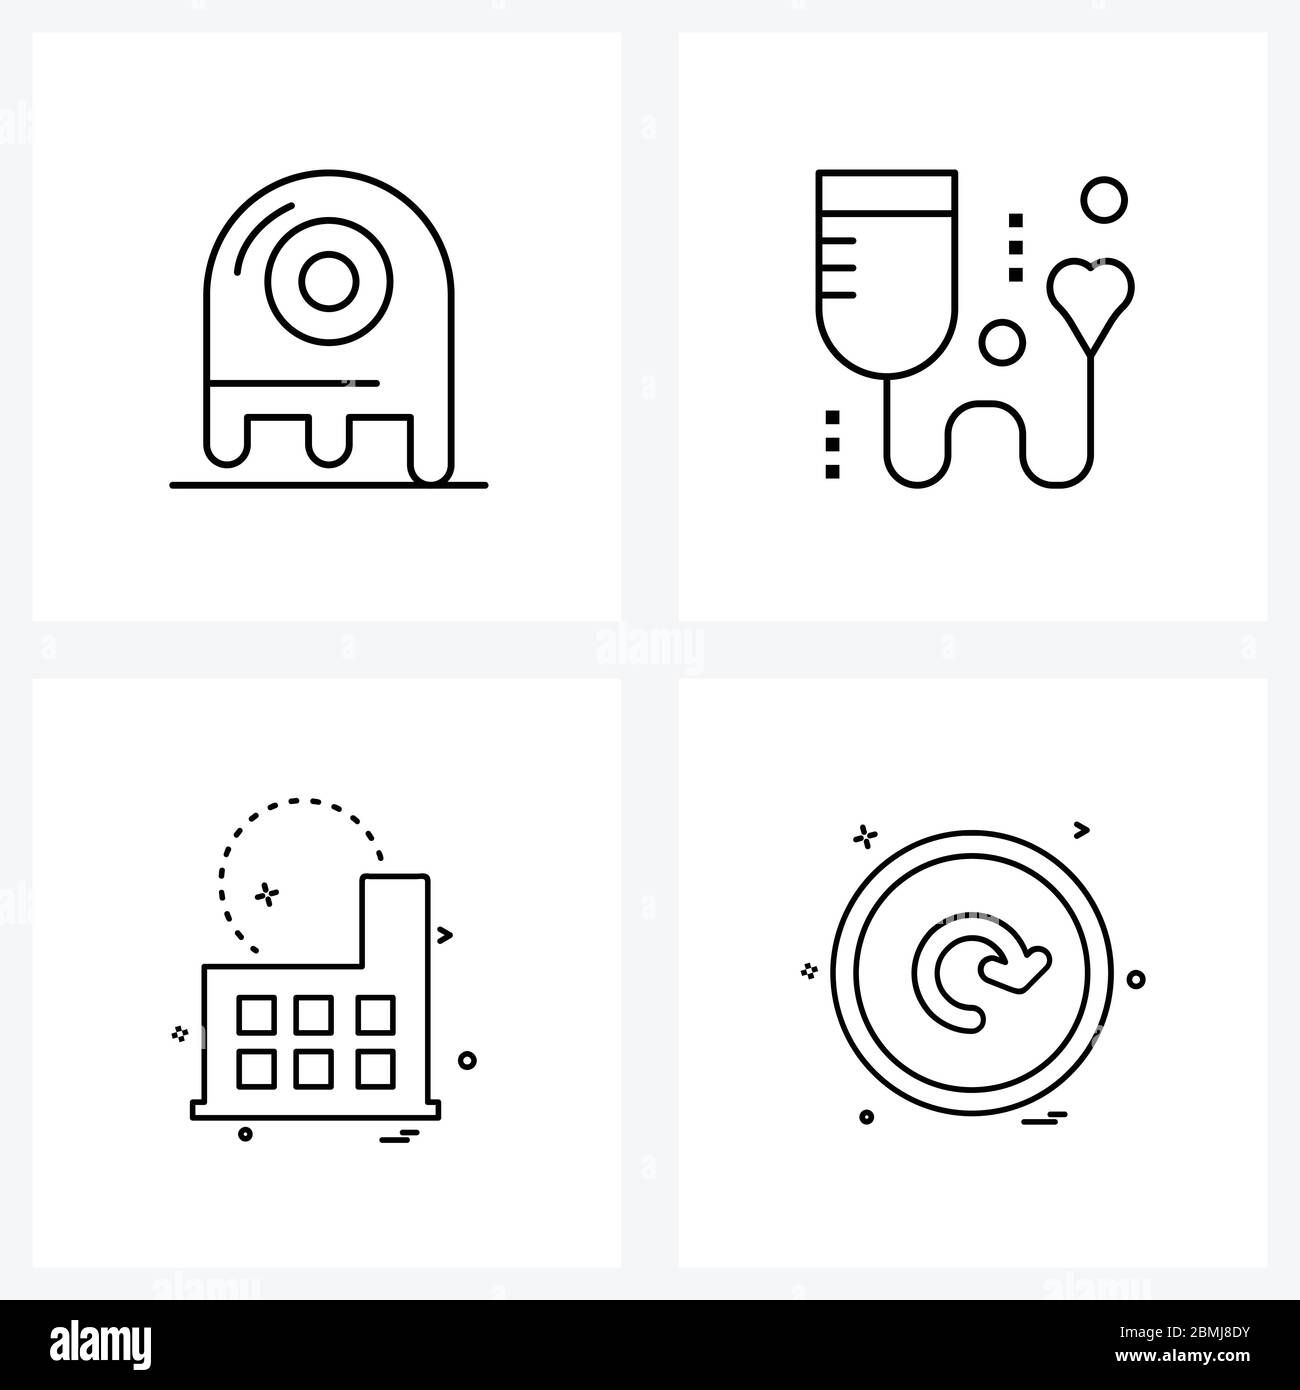 4 Universal Icons Pixel Perfect Symbols of alien, estate, blood, building, user interface Vector Illustration Stock Vector